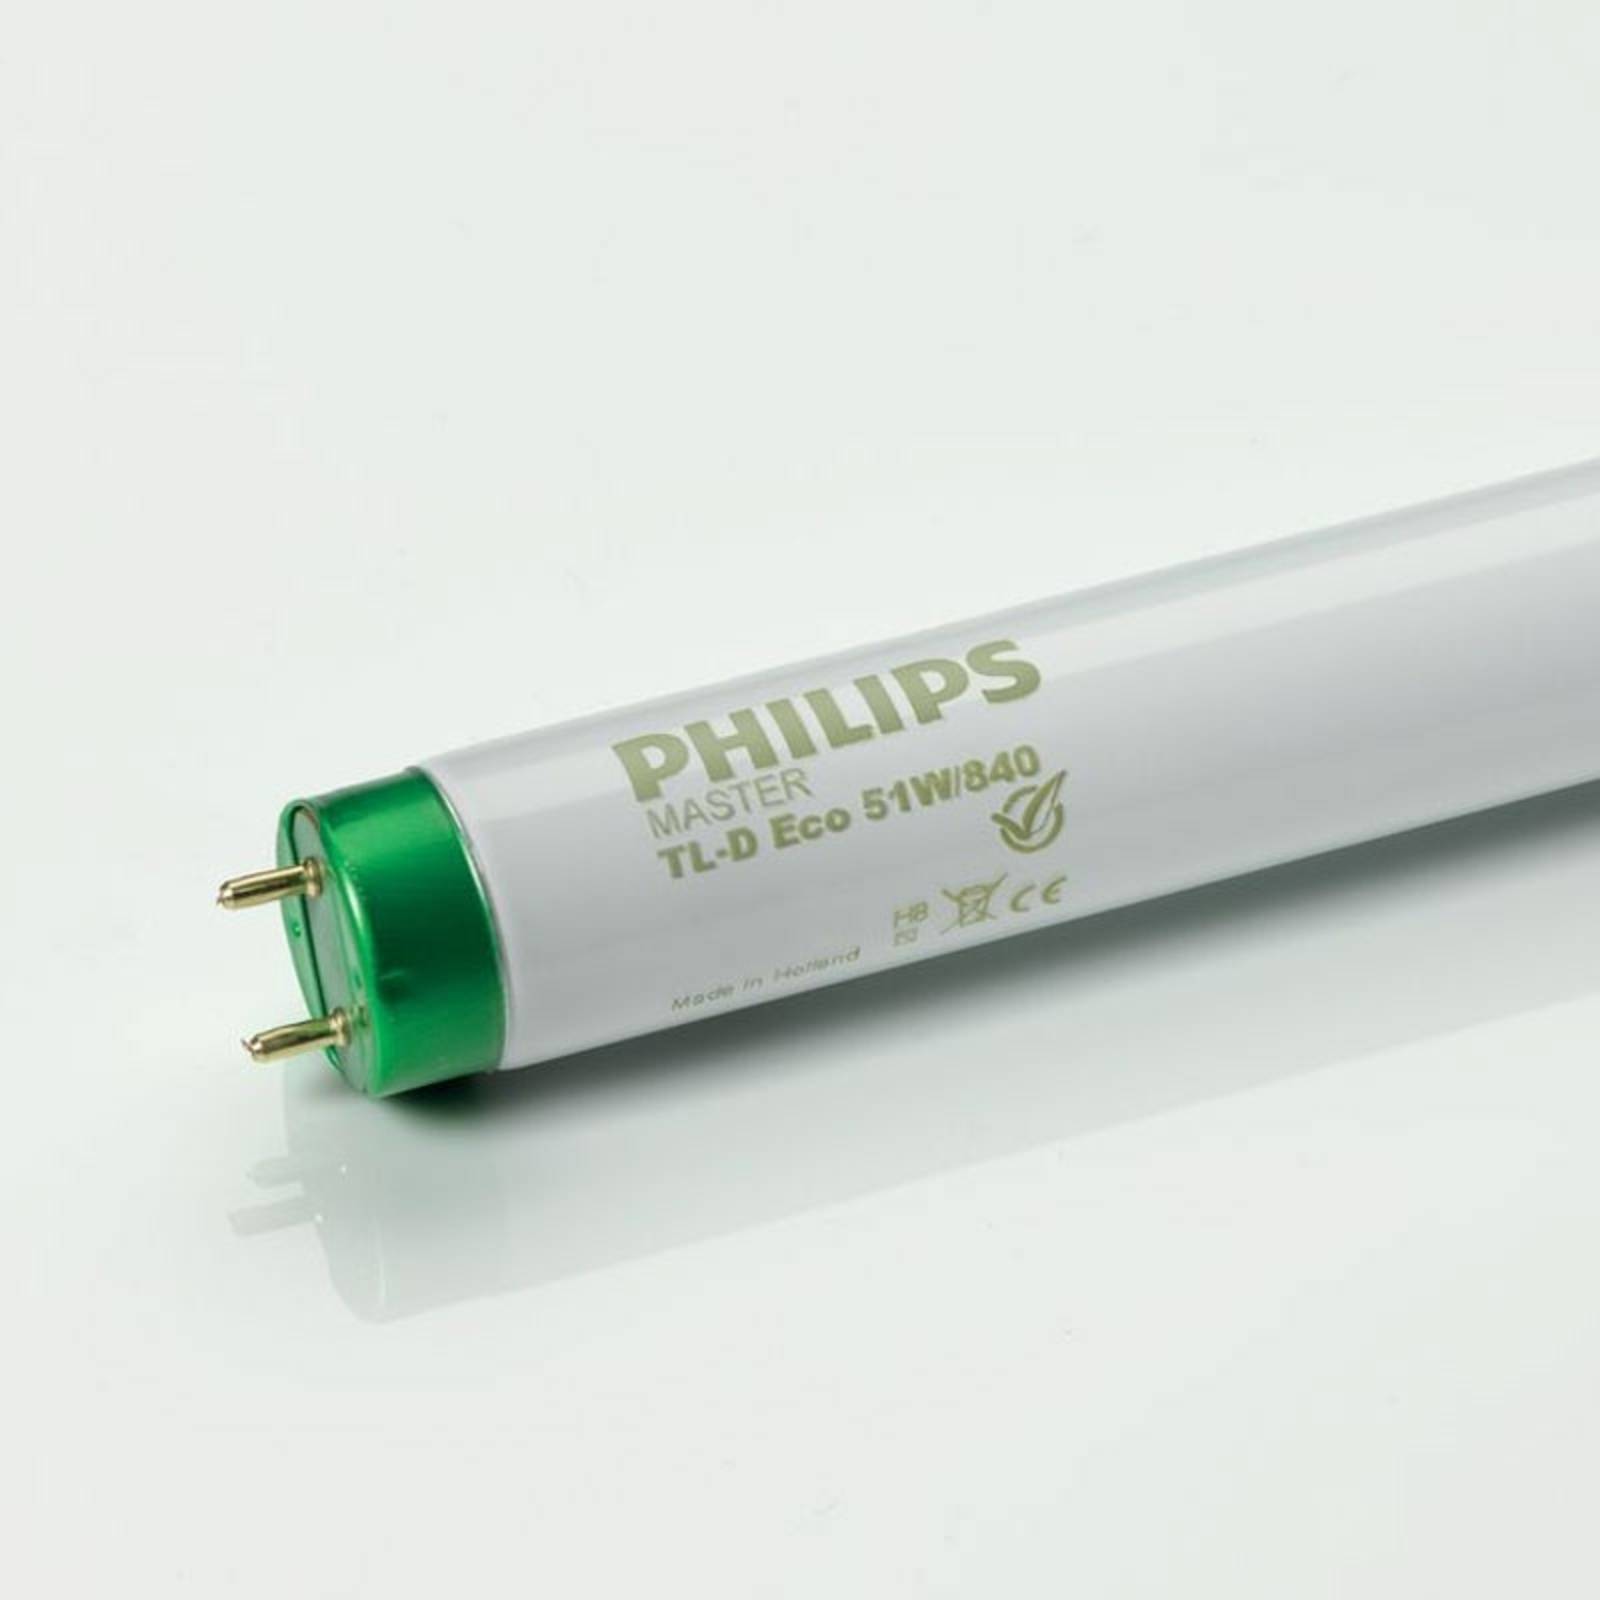 Image of Philips Master TL-D Eco G13 T8 16W 840